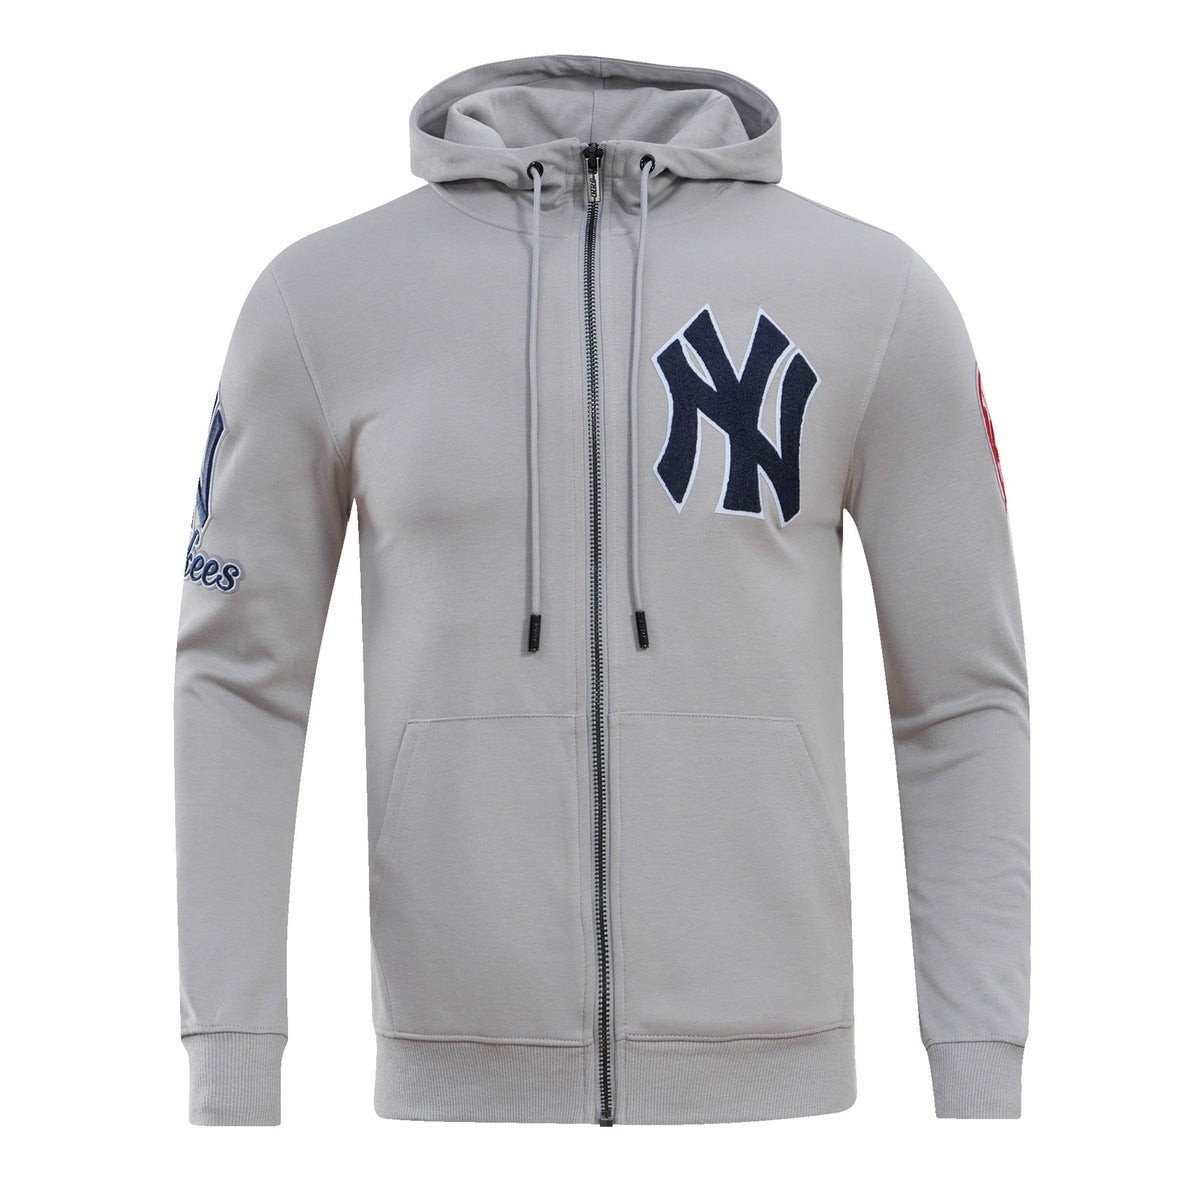 Luxury wear collection licenced by MLB New York Yankees | Pro Standard